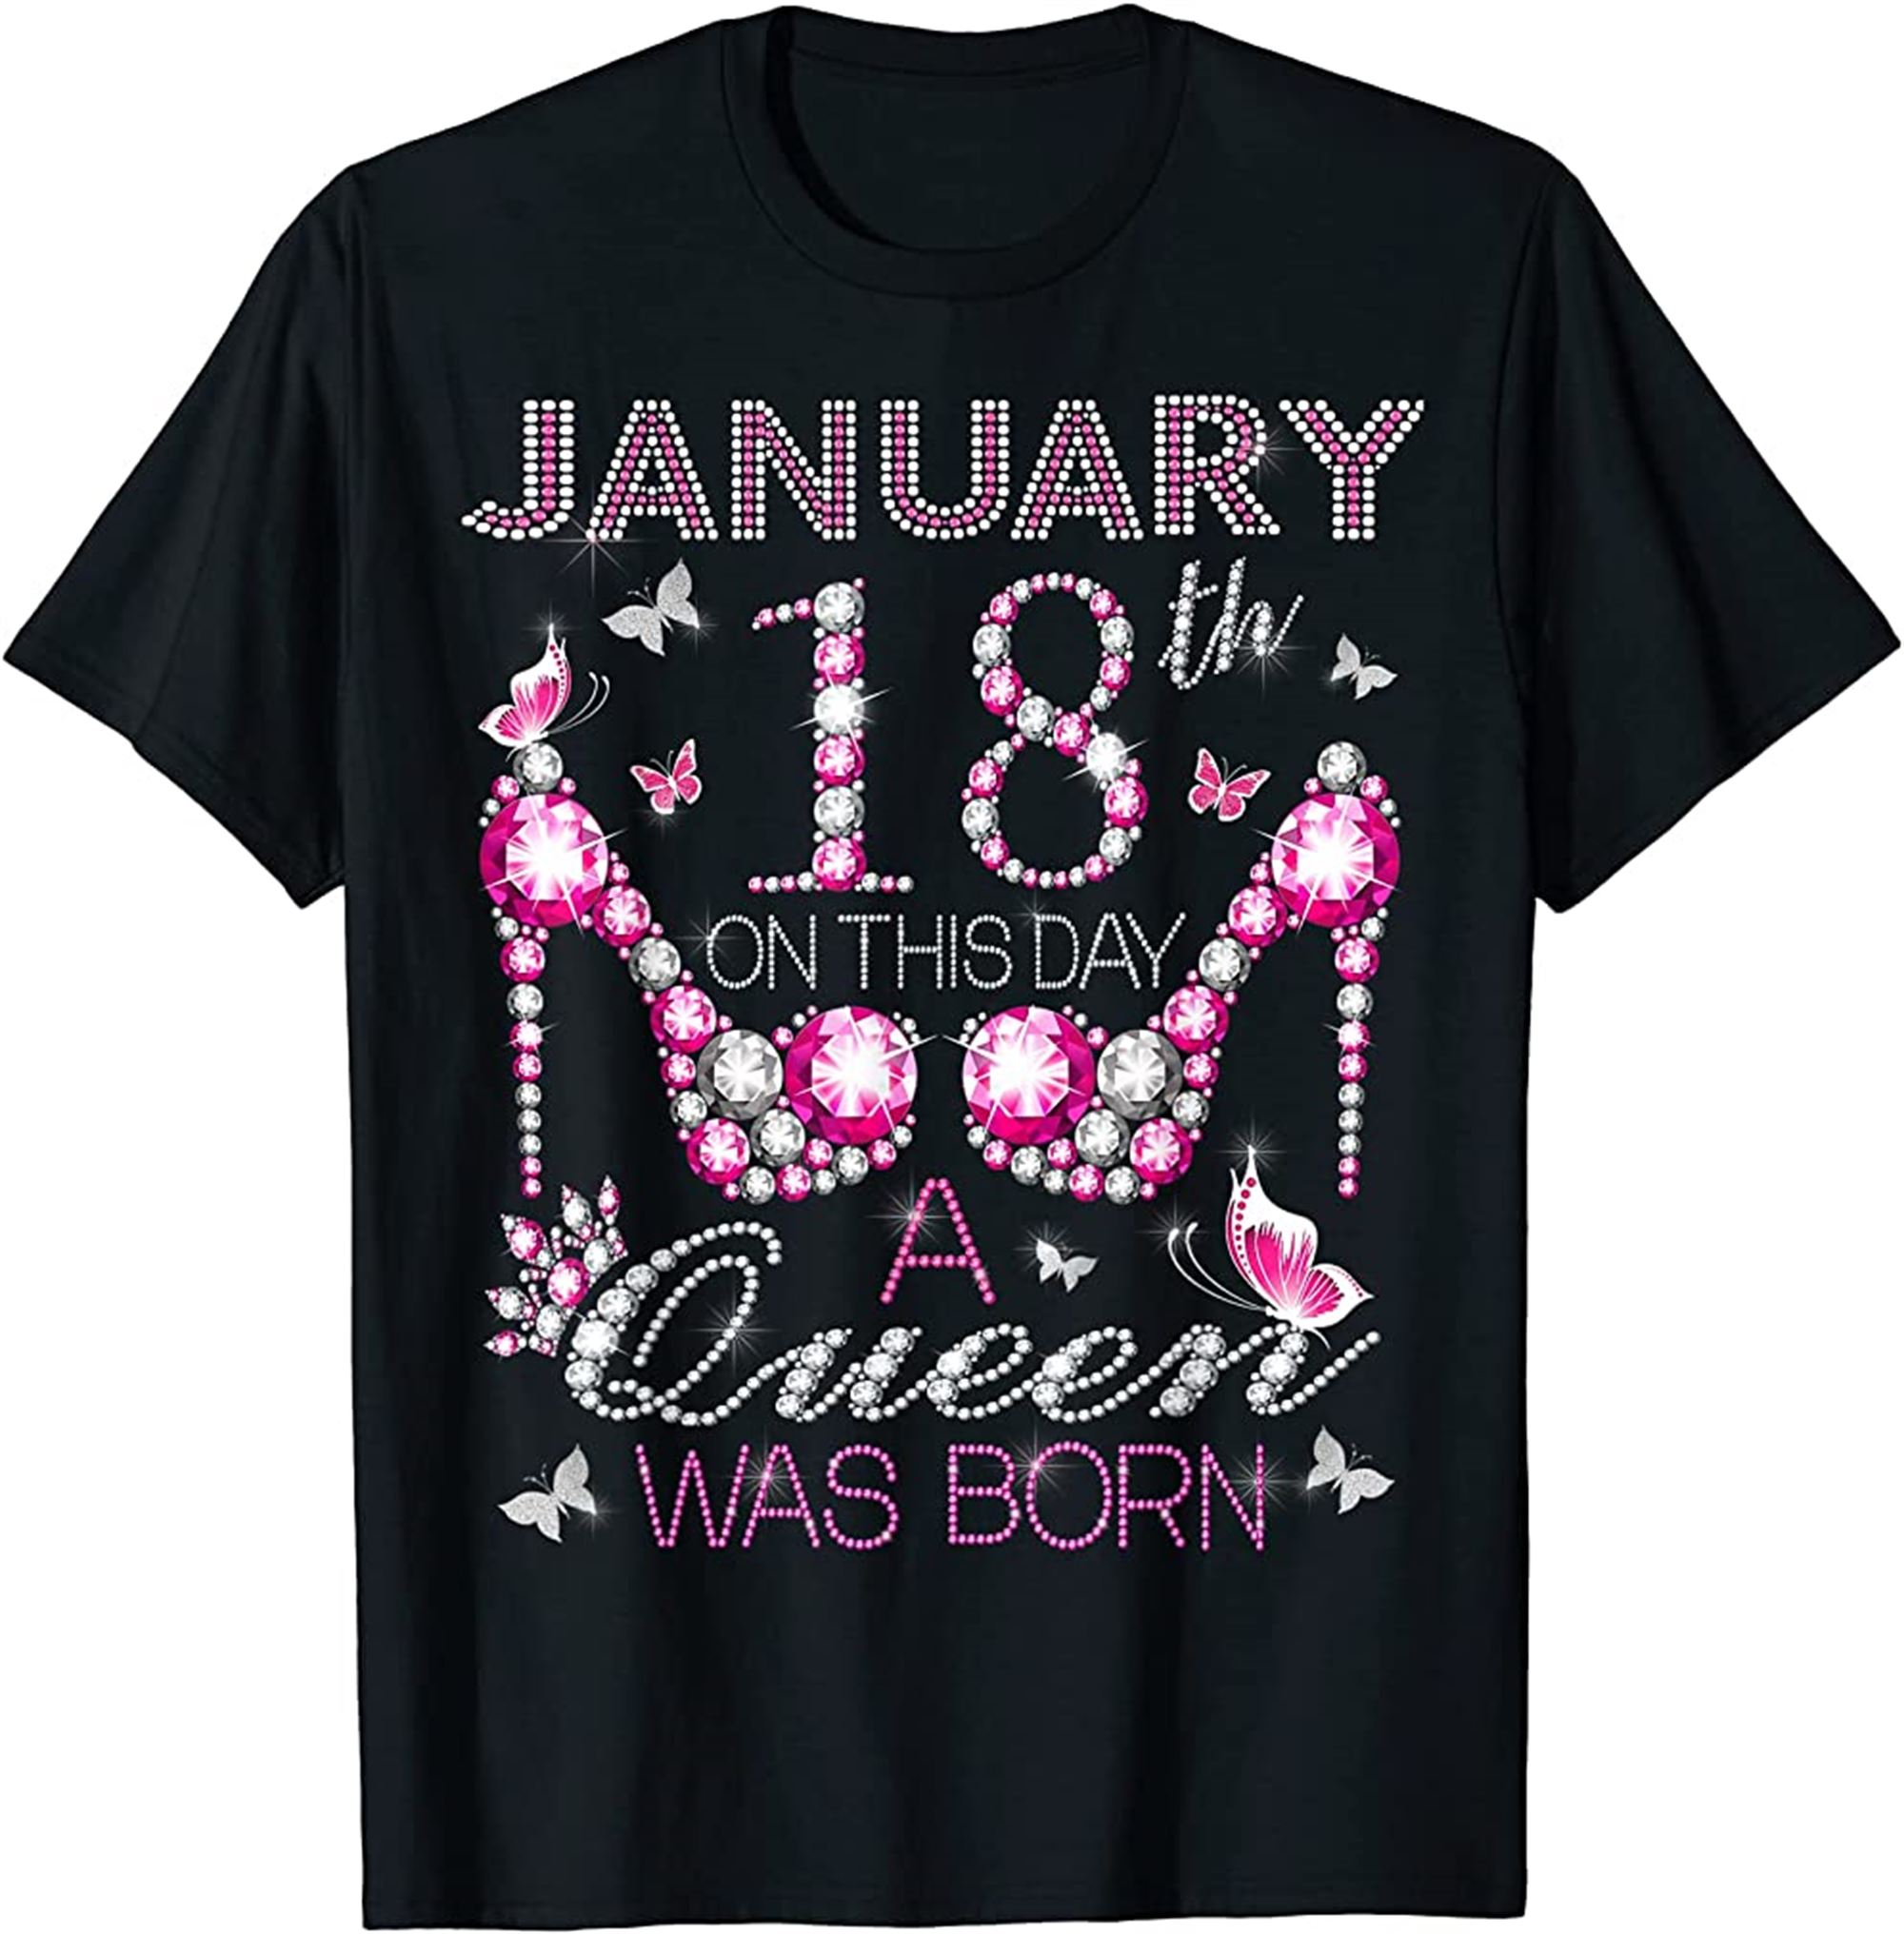 On January 18th A Queen Was Born Aquarius Capricorn Birthday T-shirt Size Up To 5xl